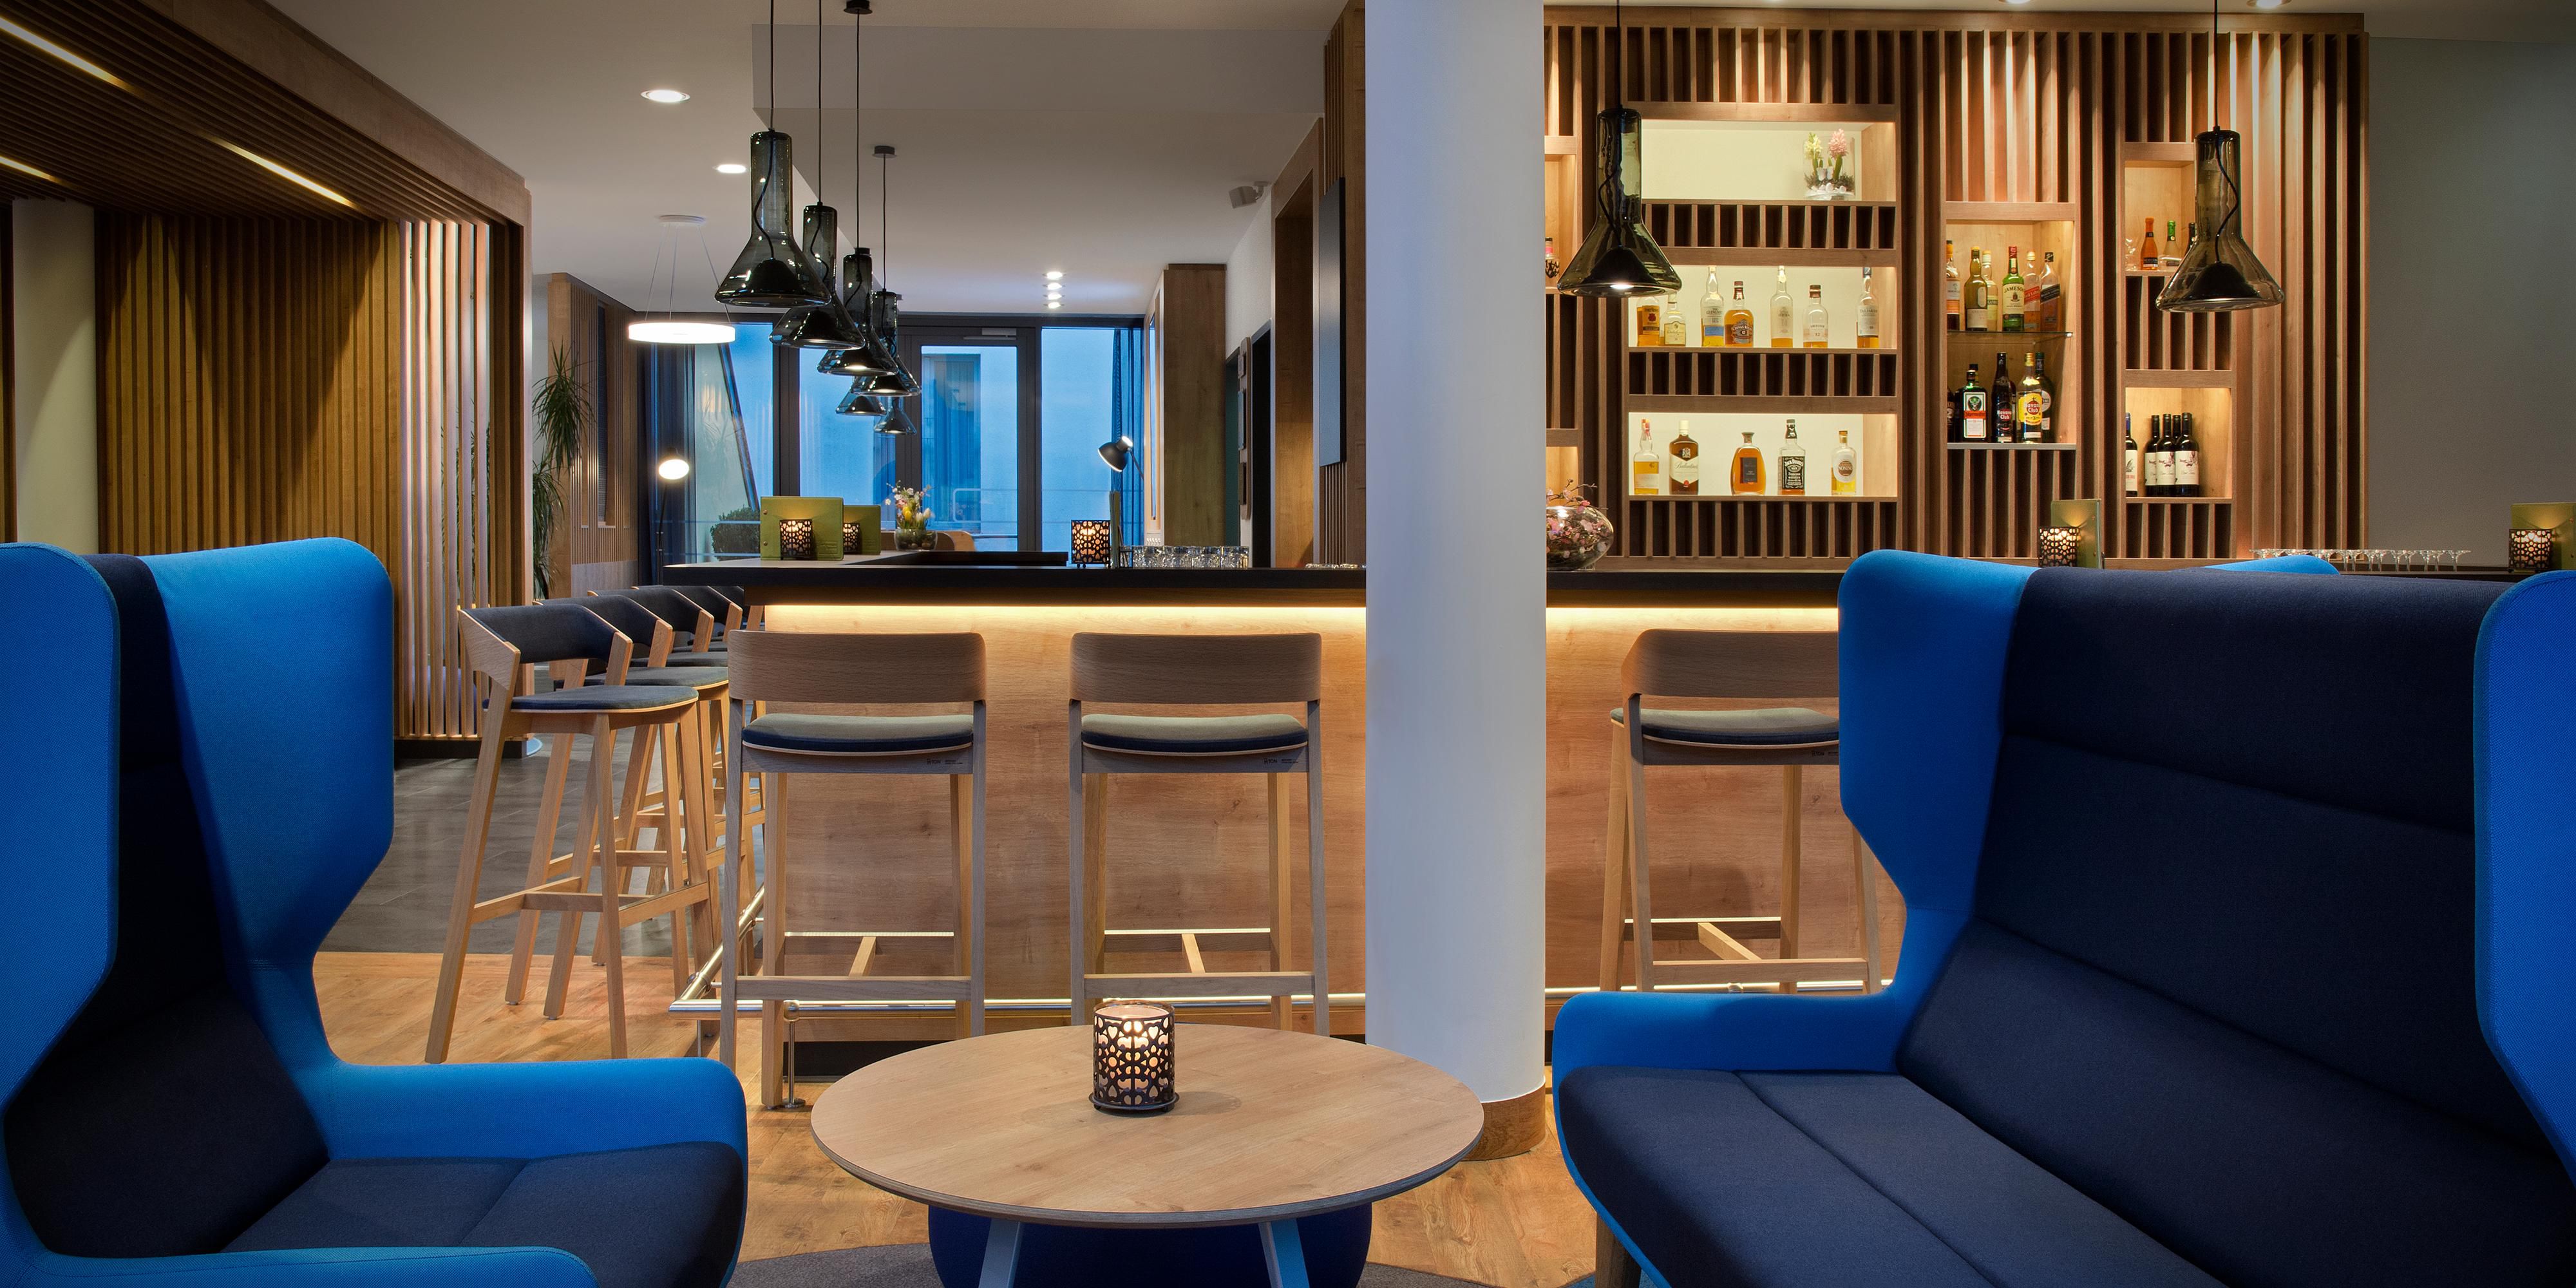 Our hotel bar is a relaxed meeting place for a friendly get-together. Enjoy a refreshing soft drink, a freshly brewed coffee, a cool beer or a fruity cocktail in our bar in the Holiday Inn Express Baden-Baden.